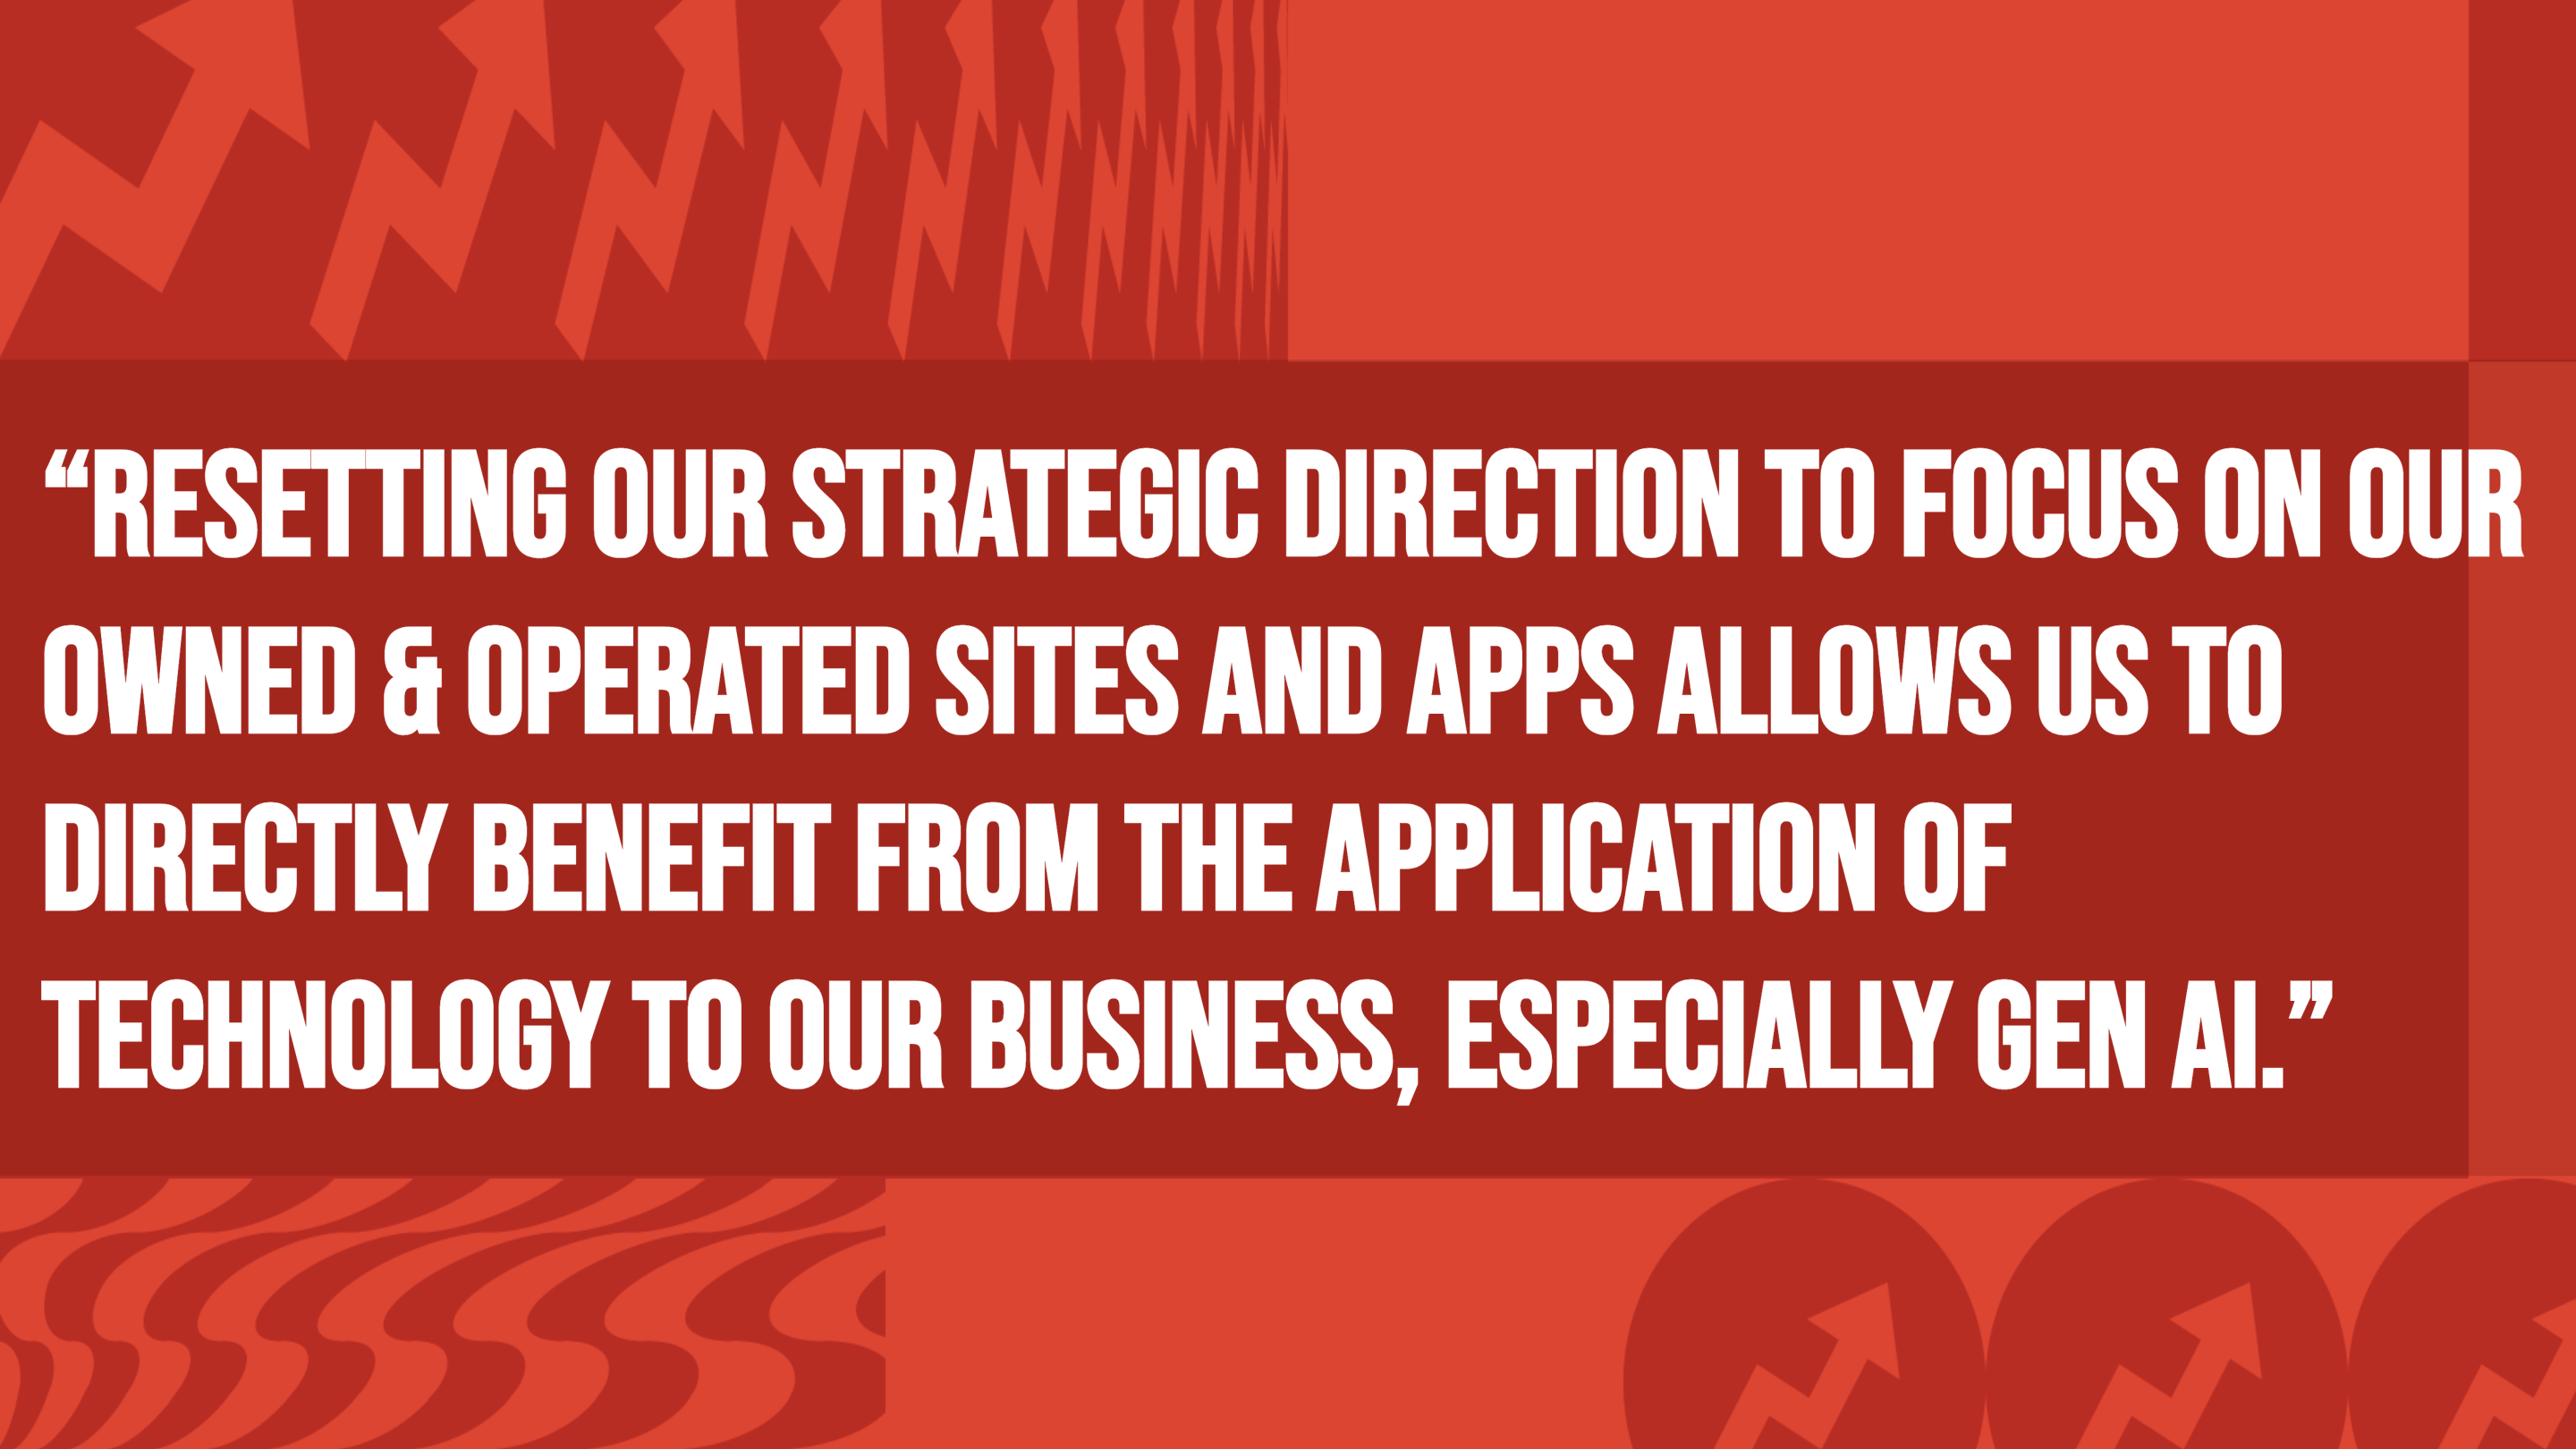 Image with text: Quote about refocusing strategic direction on owned sites and apps to utilize technology and GEN AI for business benefit